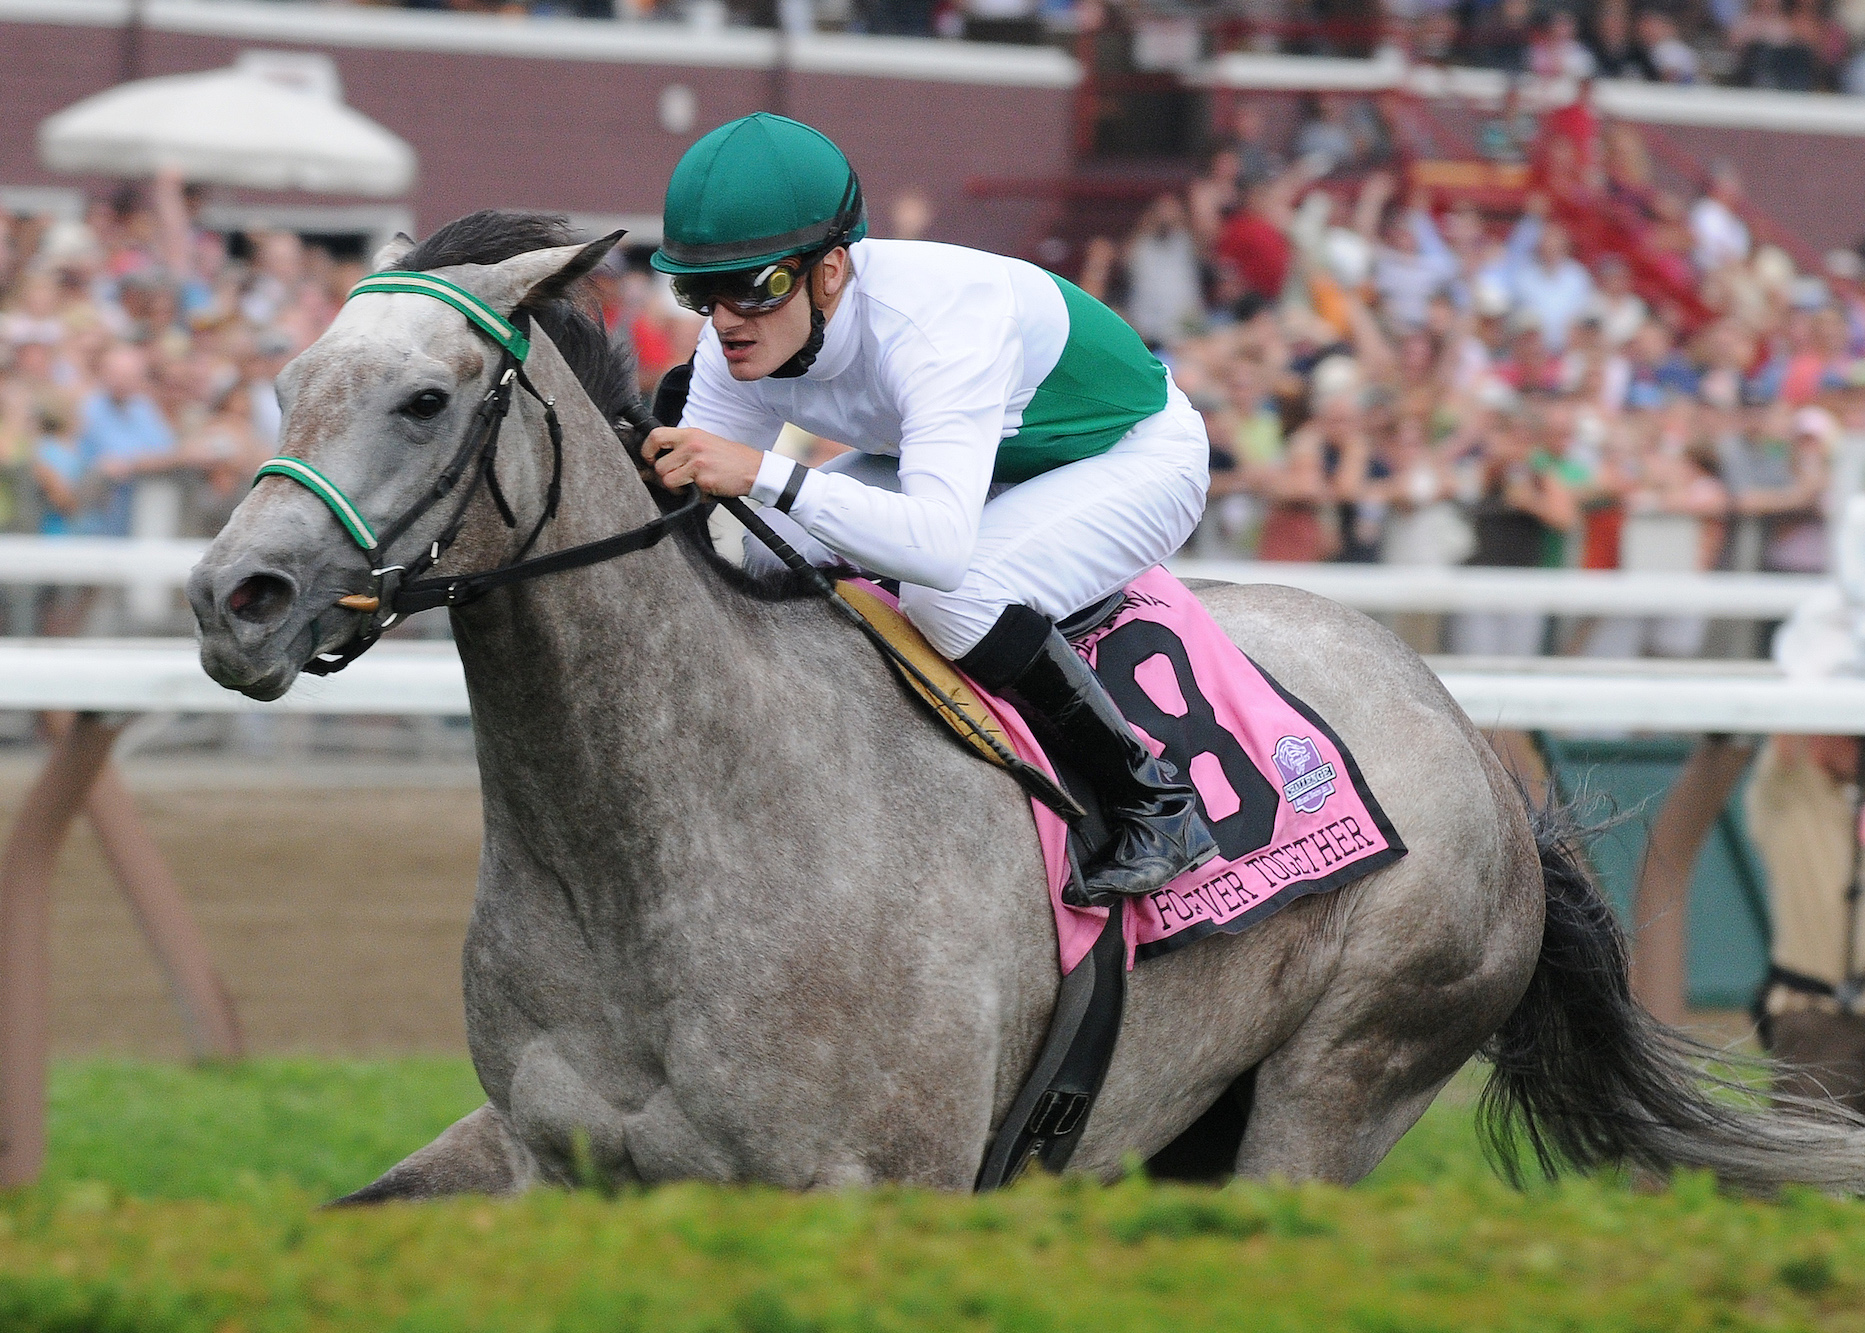 Saratoga star: the Sheppard-trained Forever Together winning the G1 Diana Stakes at Saratoga in 2009. She also won the race in 2008, when she went on to win at the Breeders’ Cup. Photo: NYRA.com